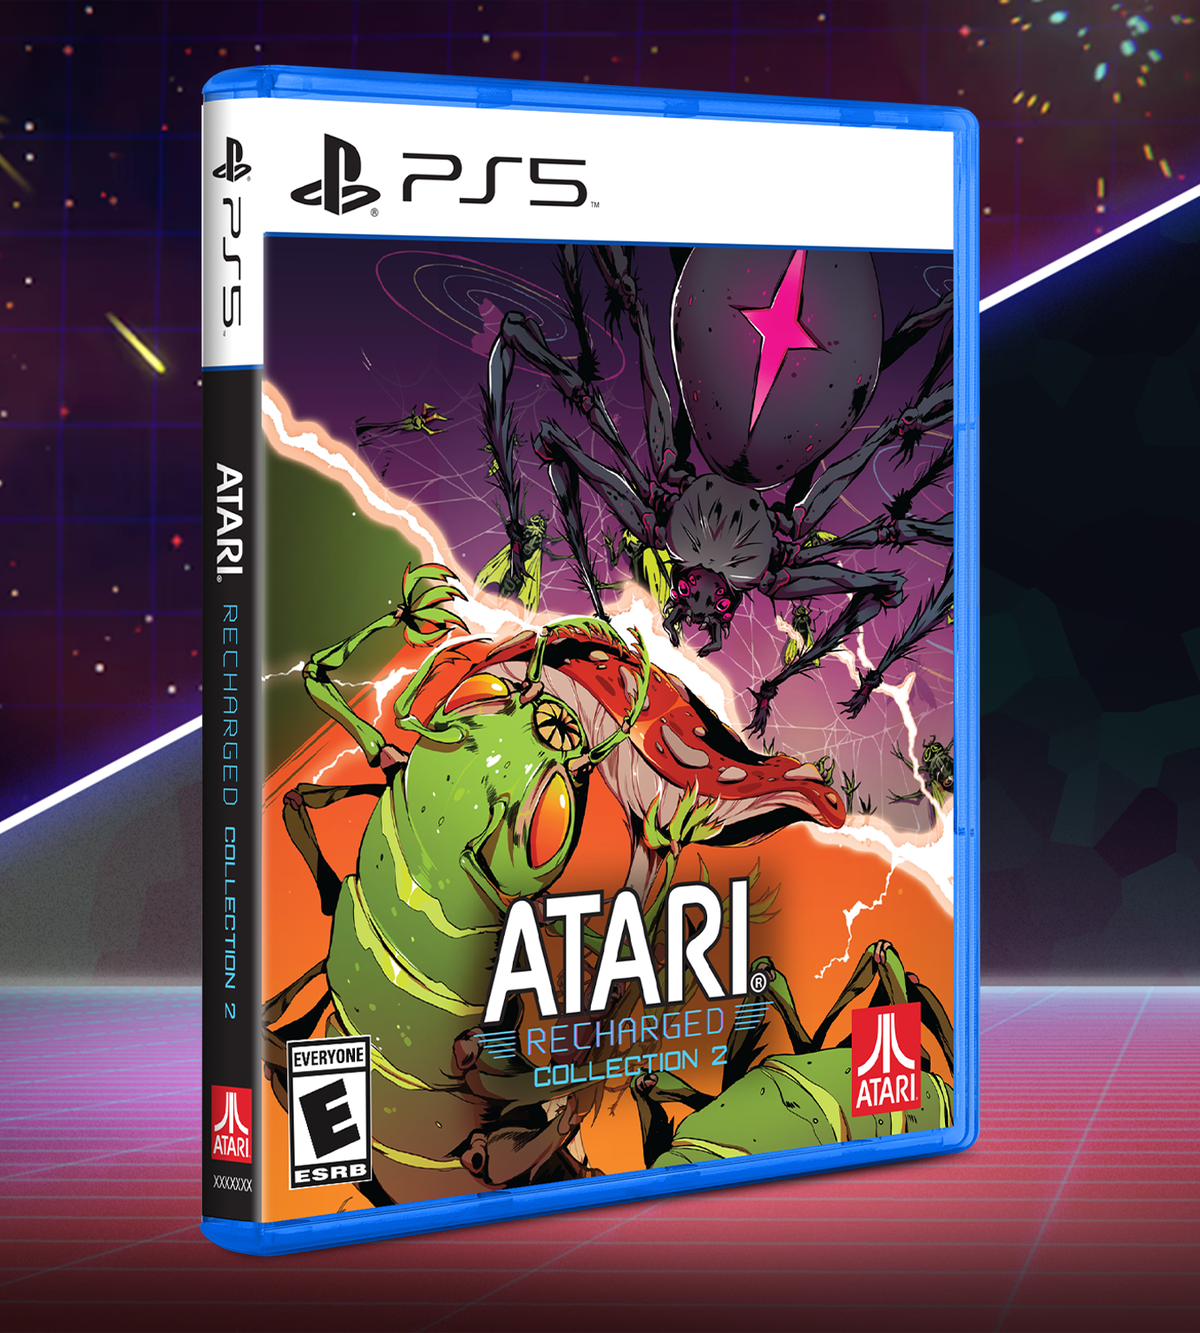 PS5 Limited Run #43: Atari Recharged Collection 2